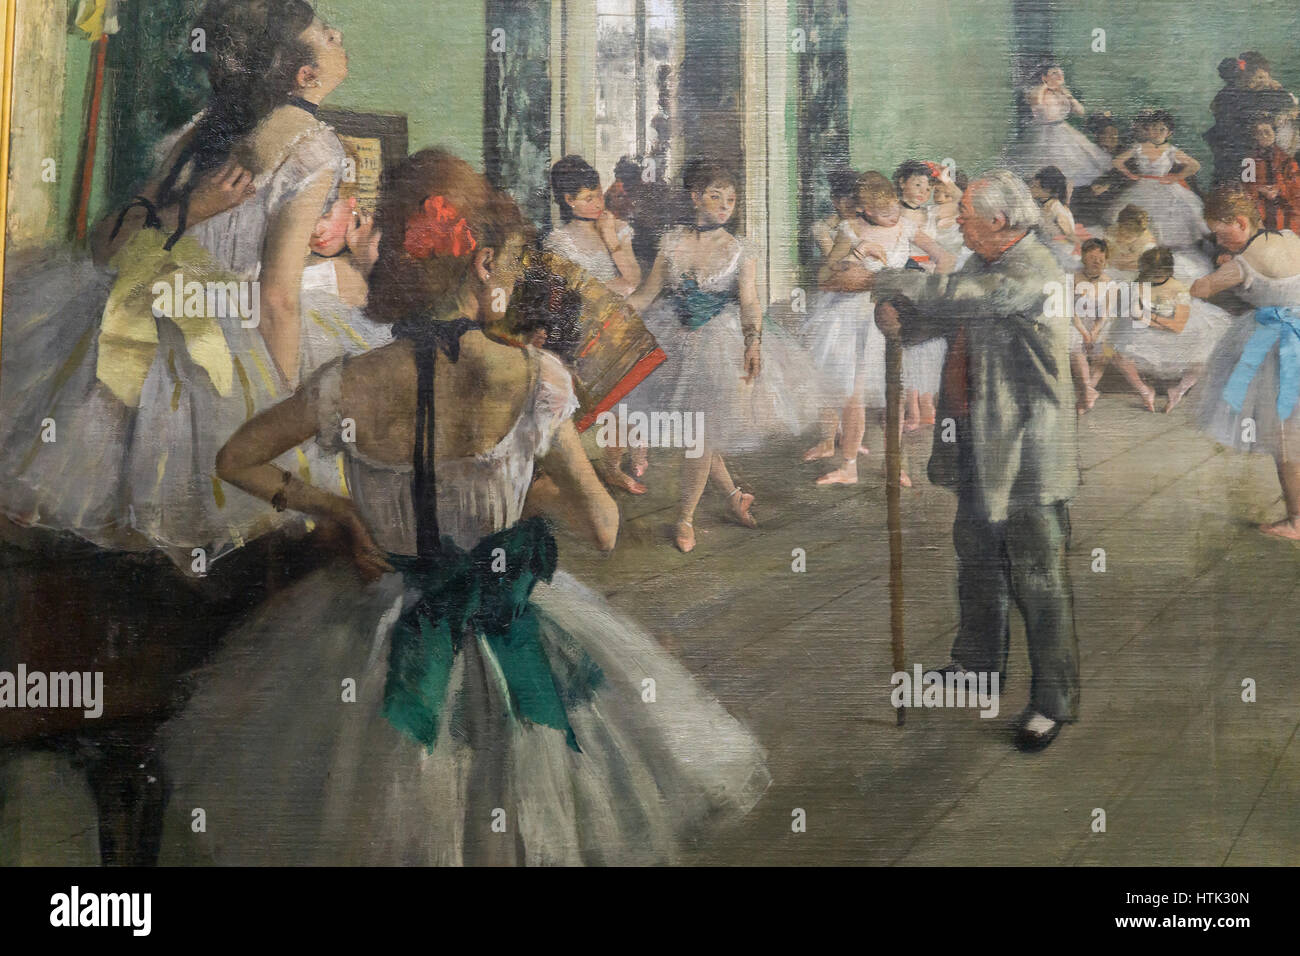 Impressionist painting at the Musee d'Orsay,Edgard Degas, Paris, France. Stock Photo